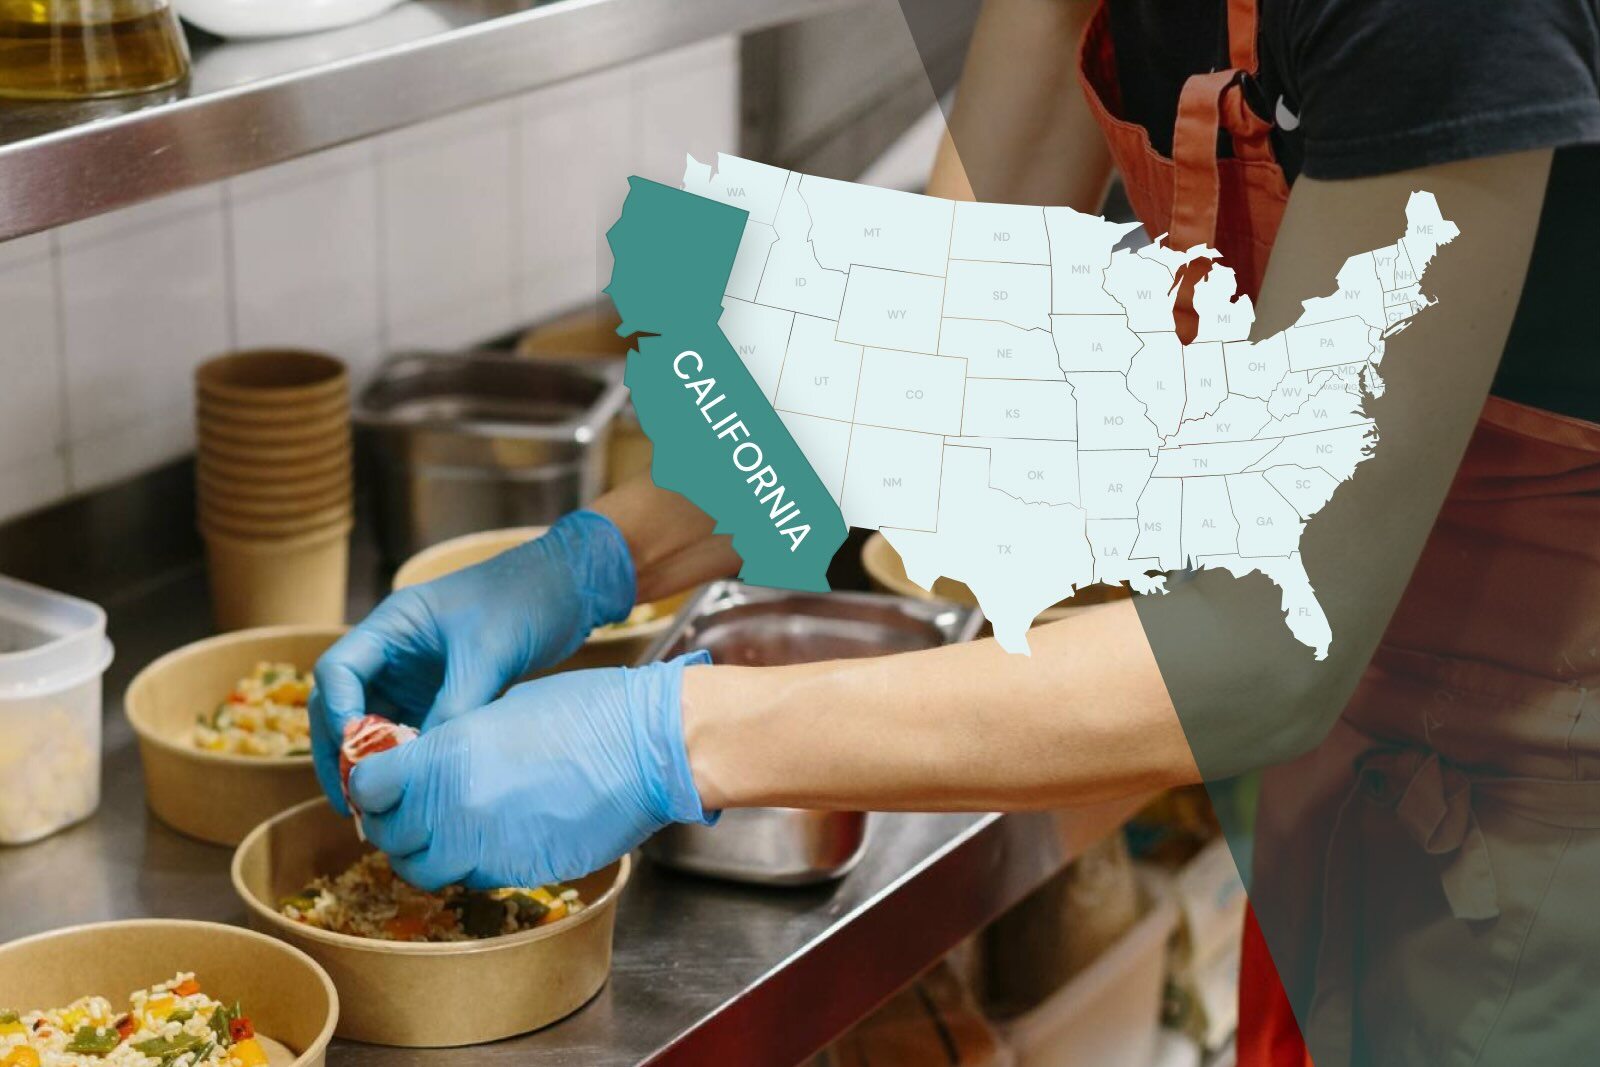 Food worker packing a meal with an overlay of a map that highlights California